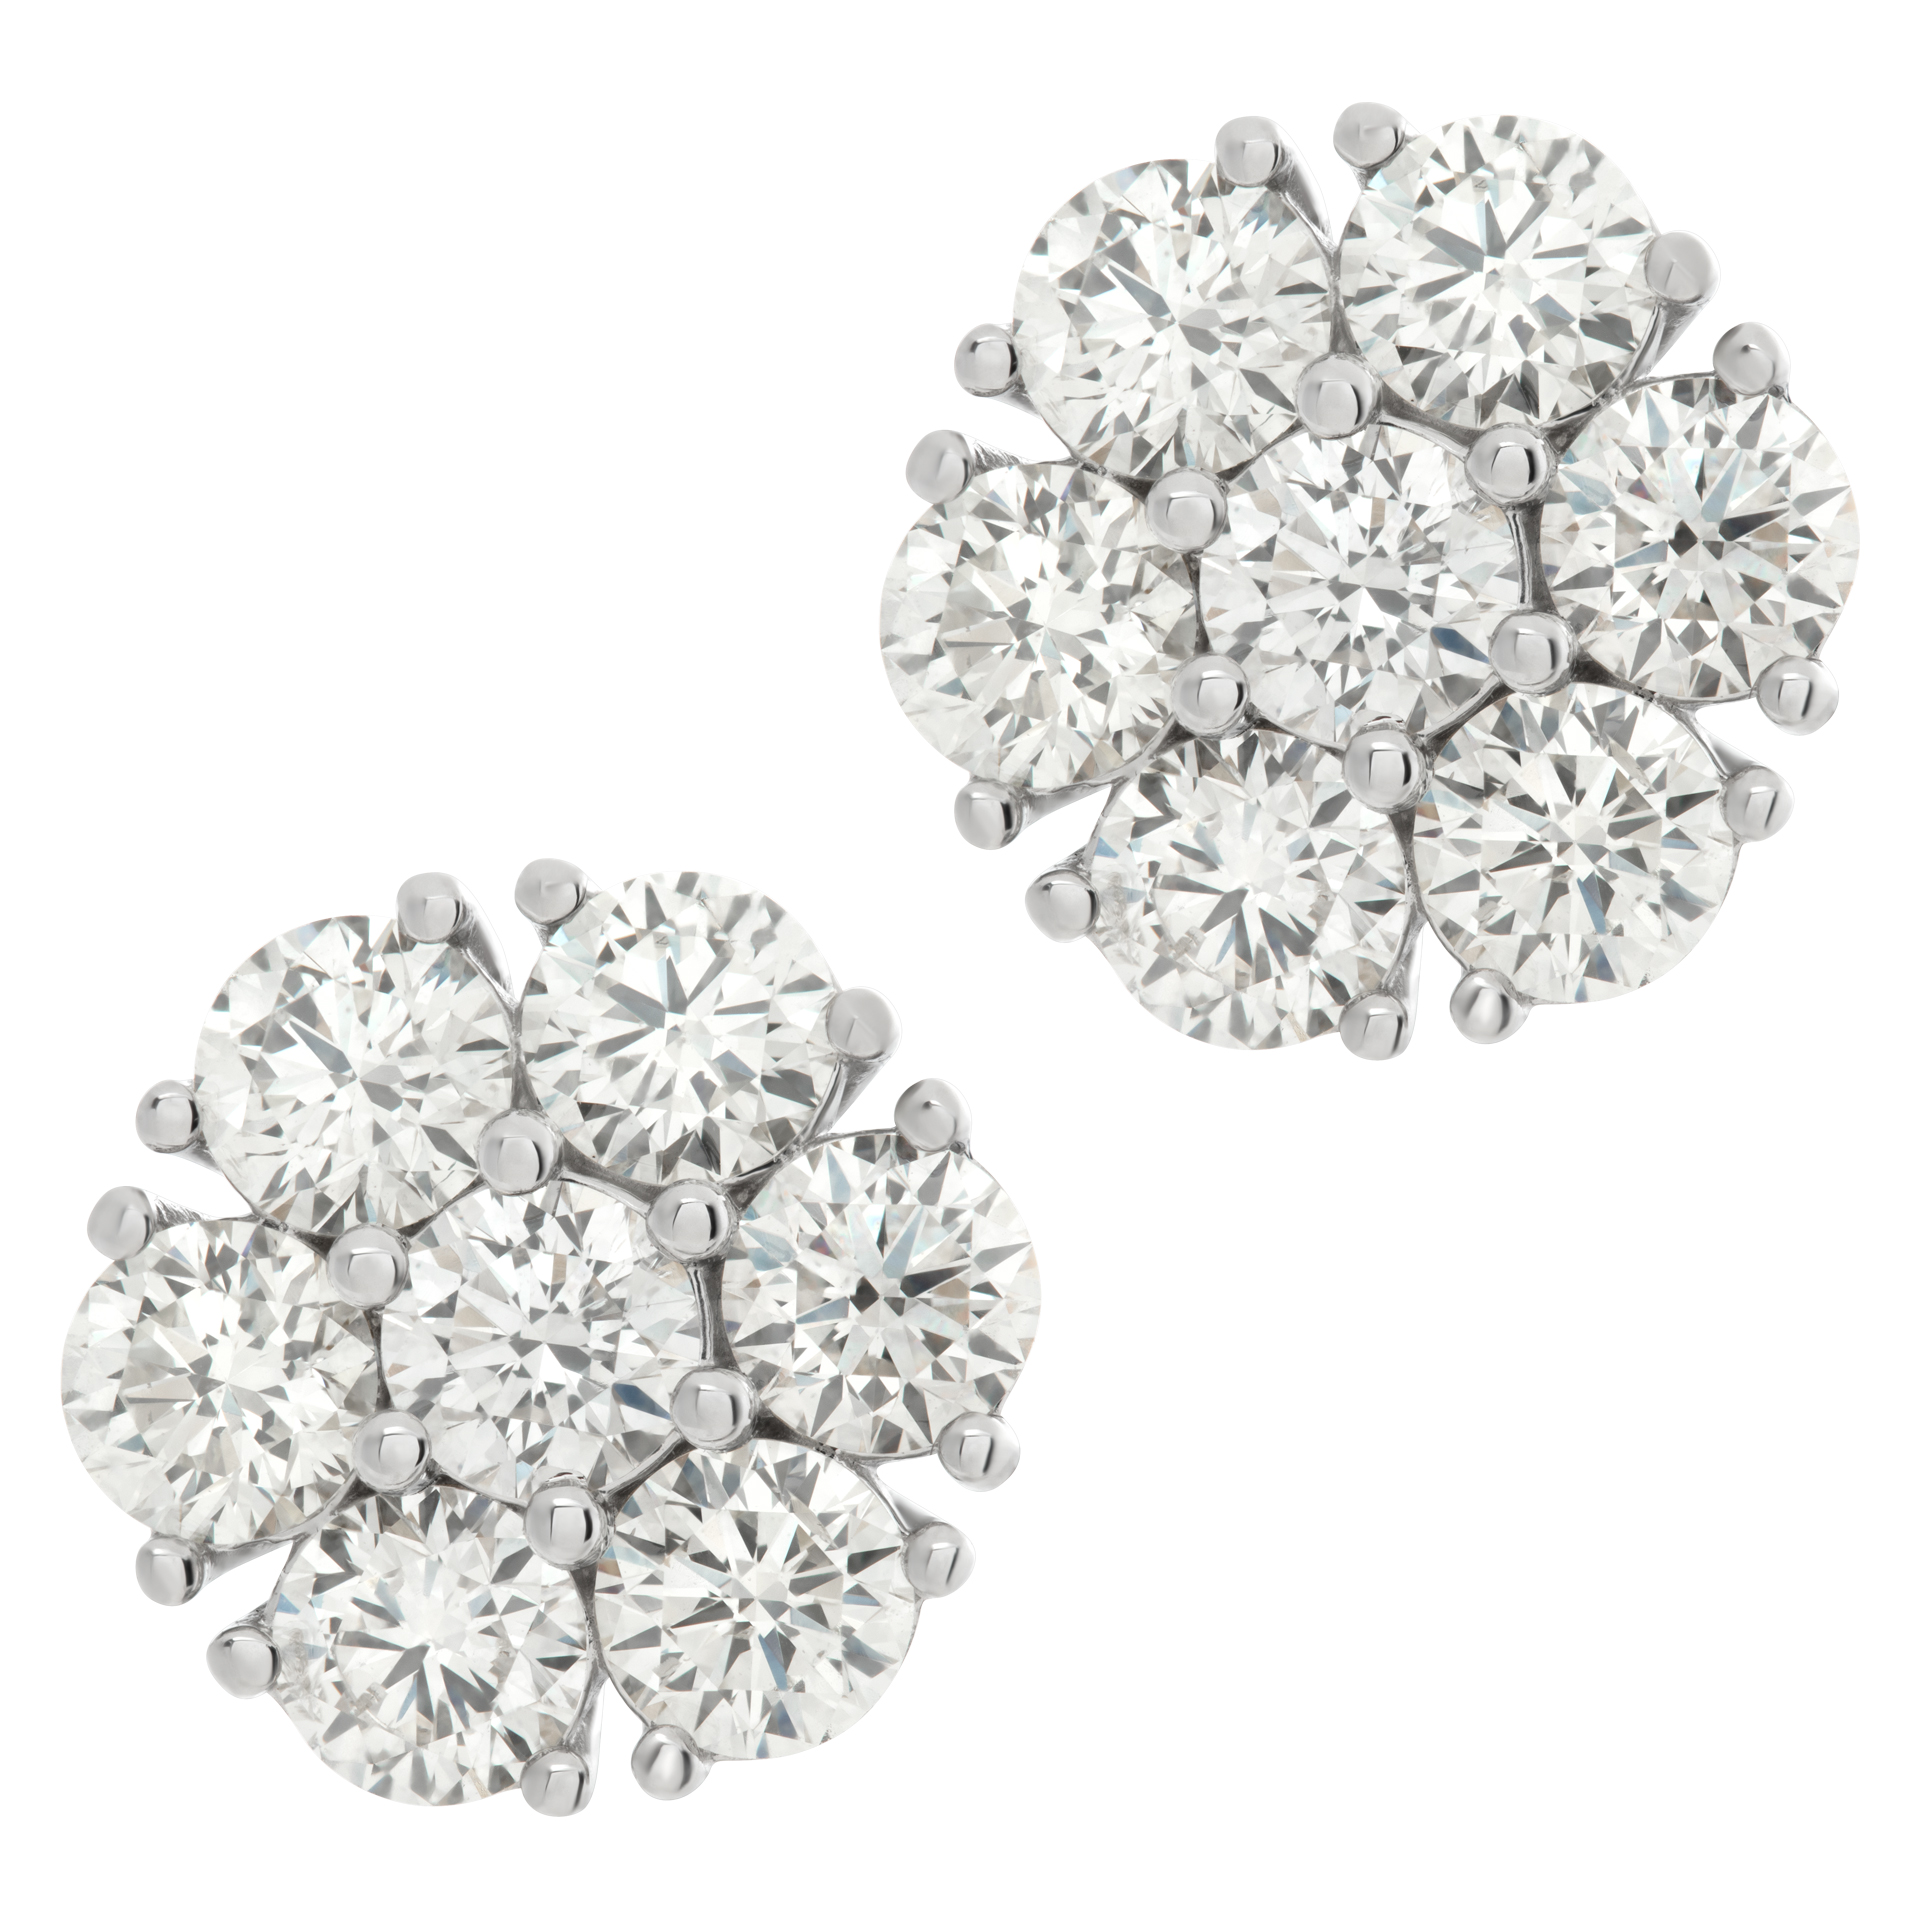 Diamond earrings in 14k white gold with 2.85 carats in diamonds. image 1